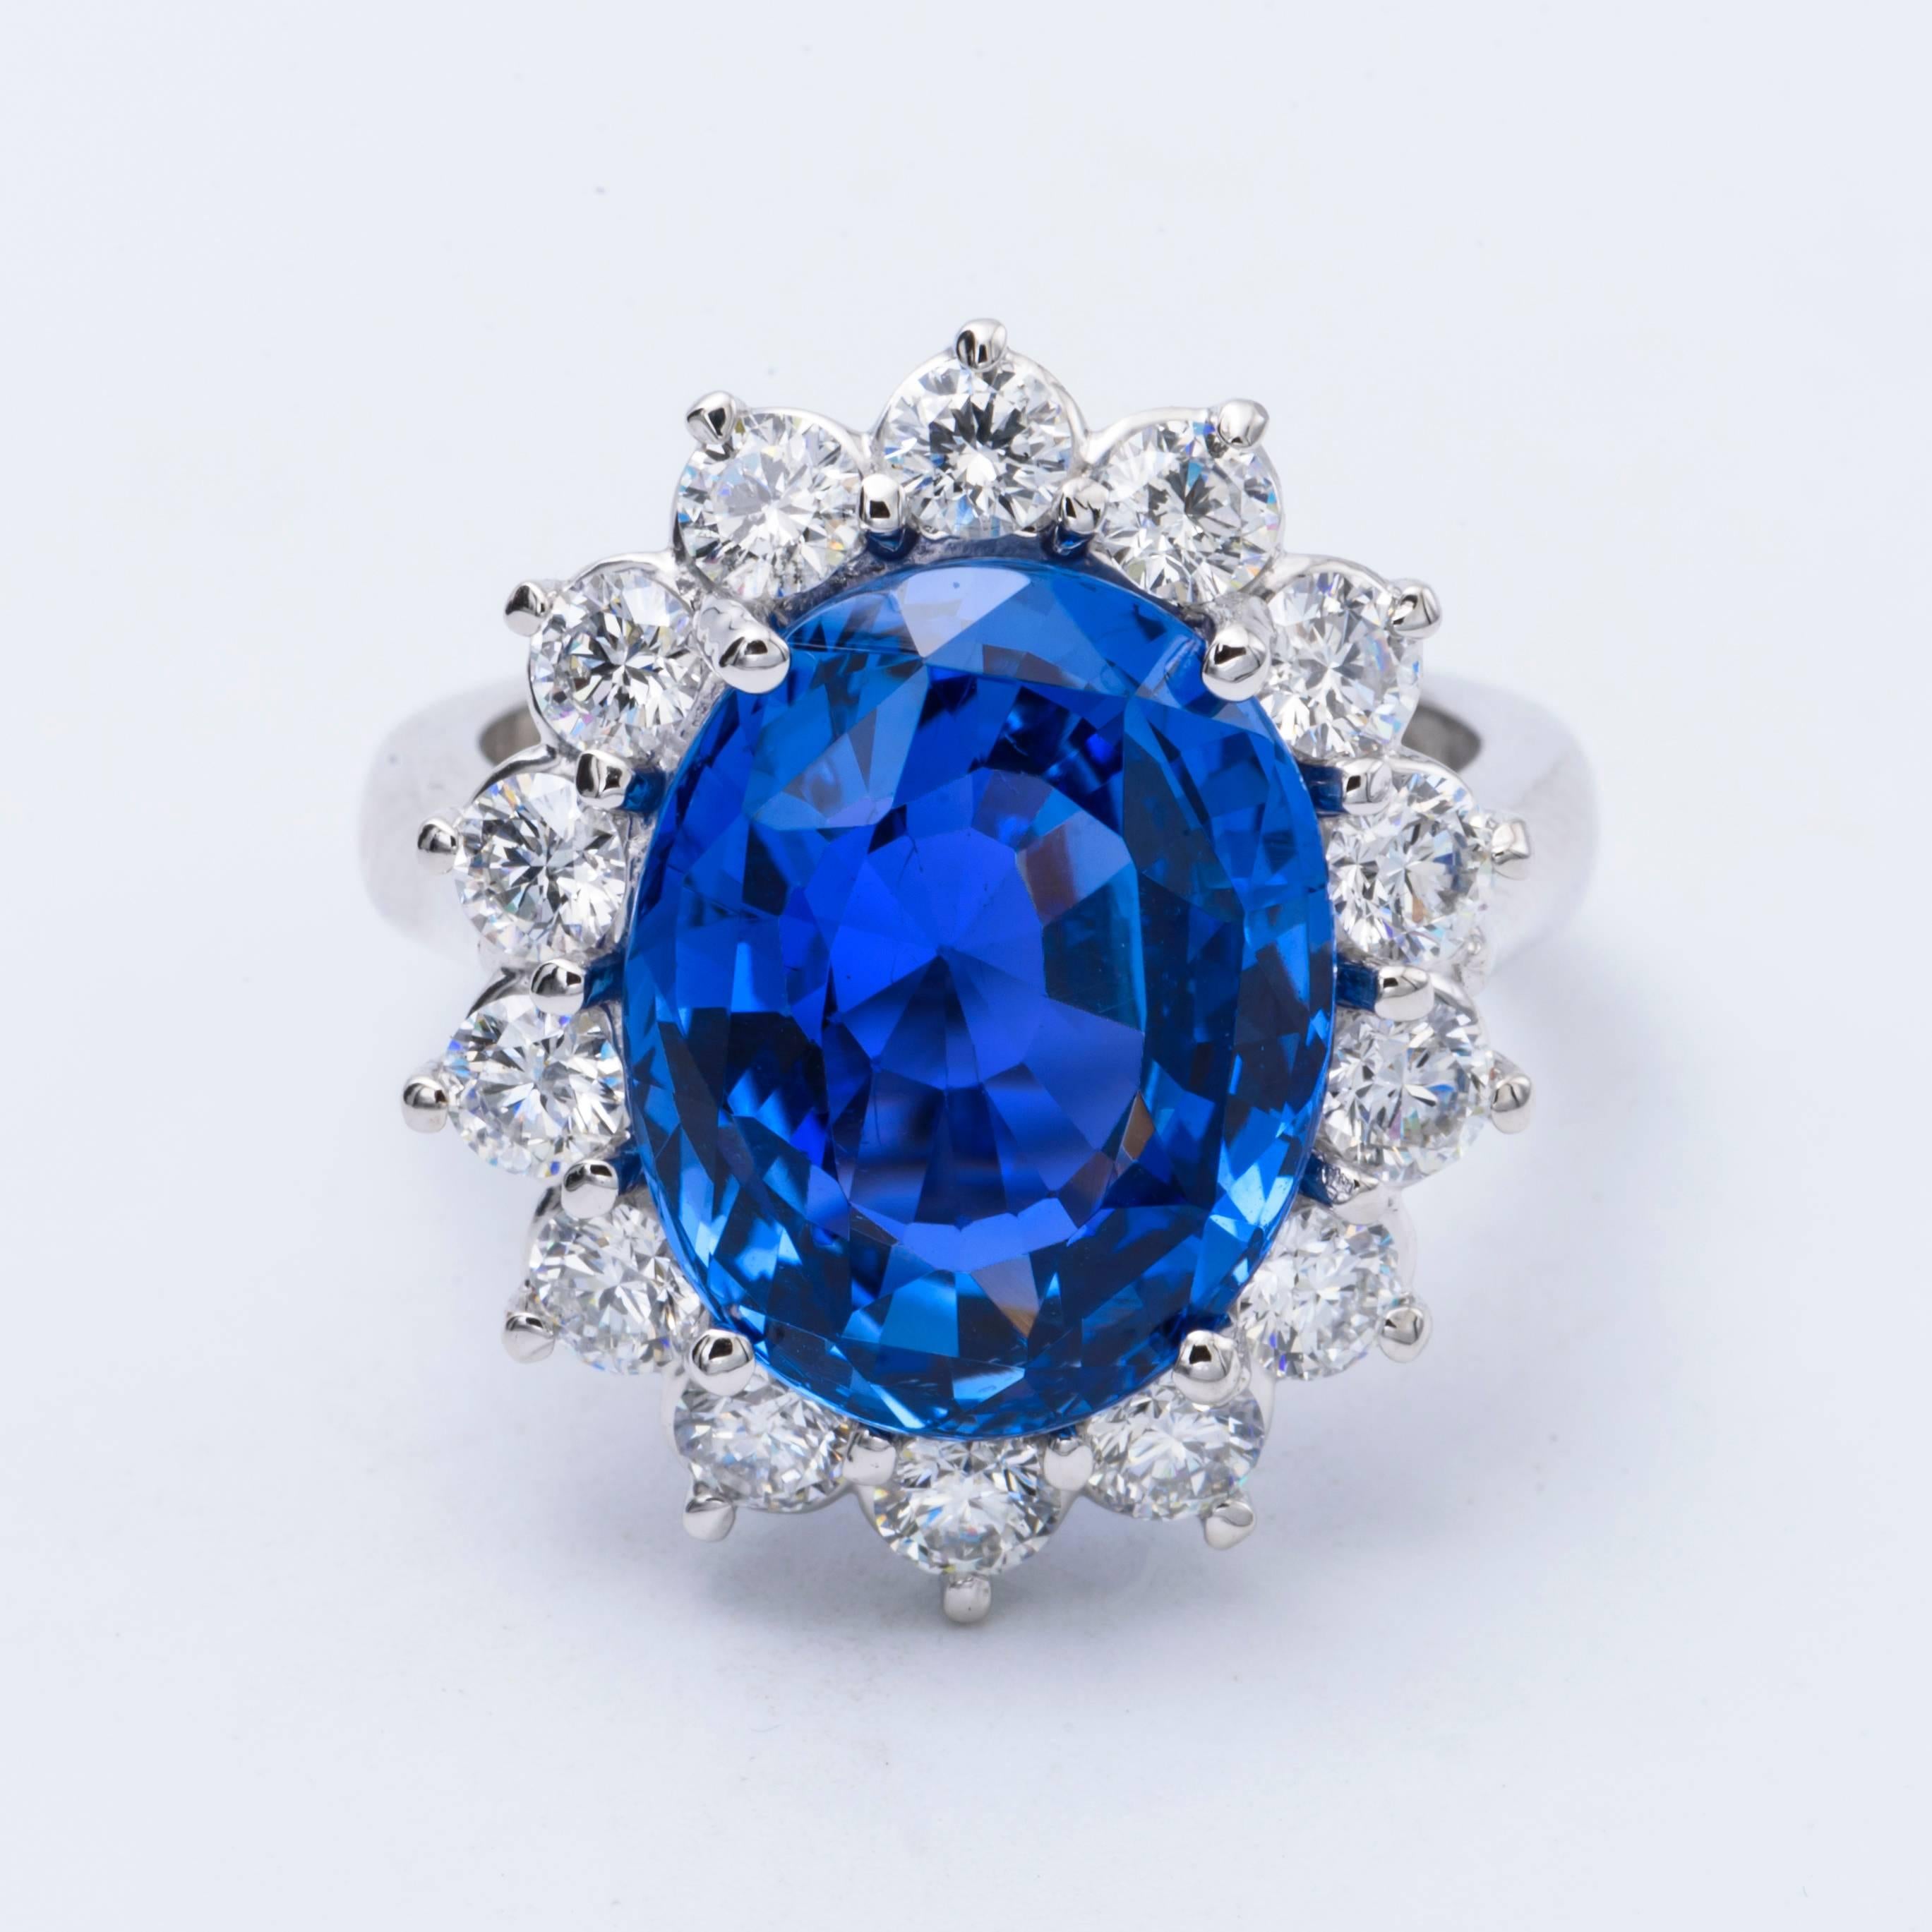 Contemporary Unheated GIA Certified Sapphire Engagment Ring 12.39 Carat